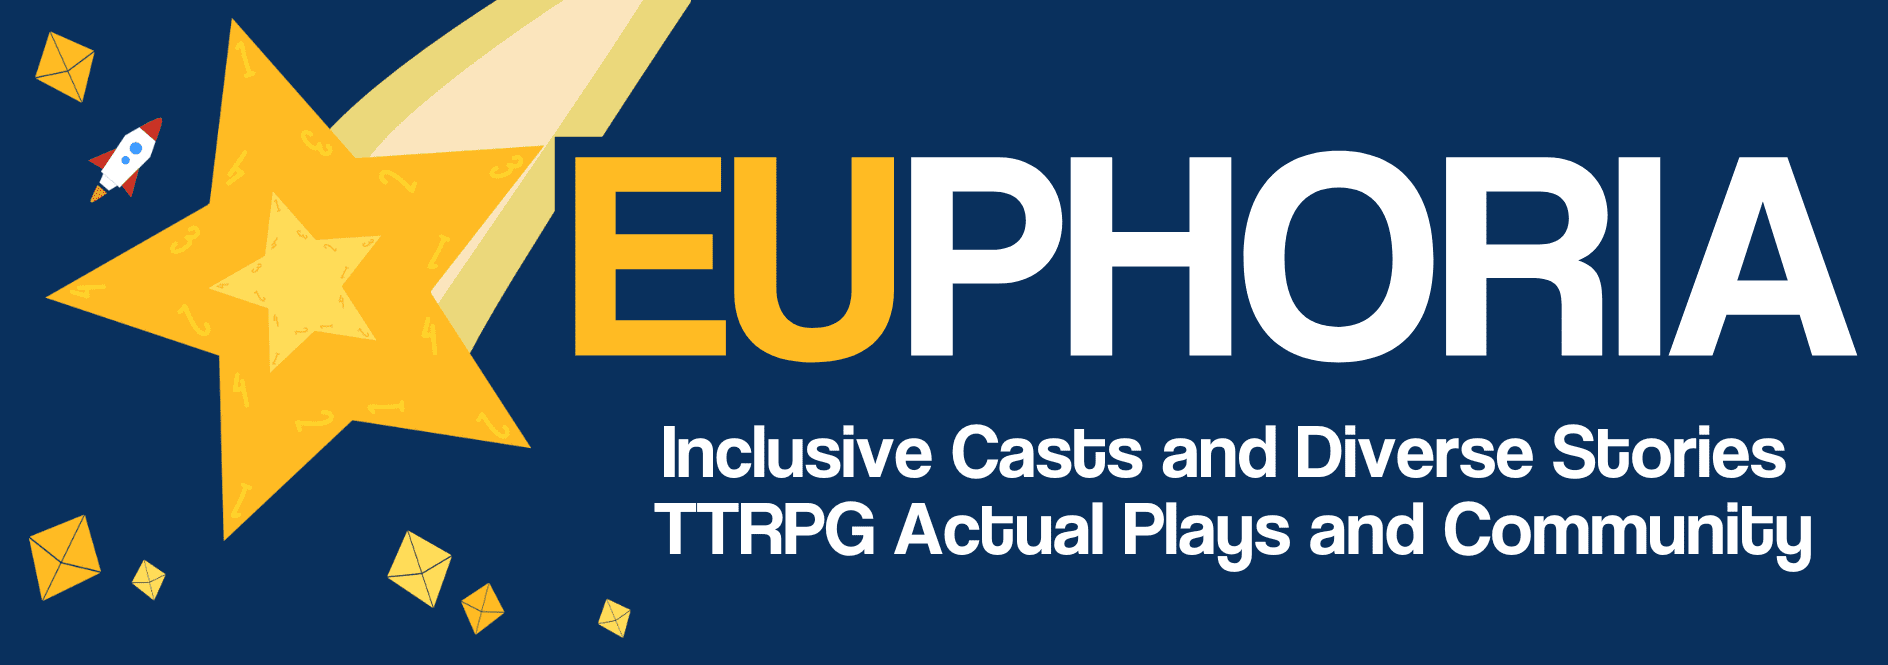 Dark blue background. Shooting star with yellow d8 dice scattered around, a white & red spaceship. Text: EUphoria. Inclusive Casts and Diverse Stories. TTRPG Actual Plays and Community
